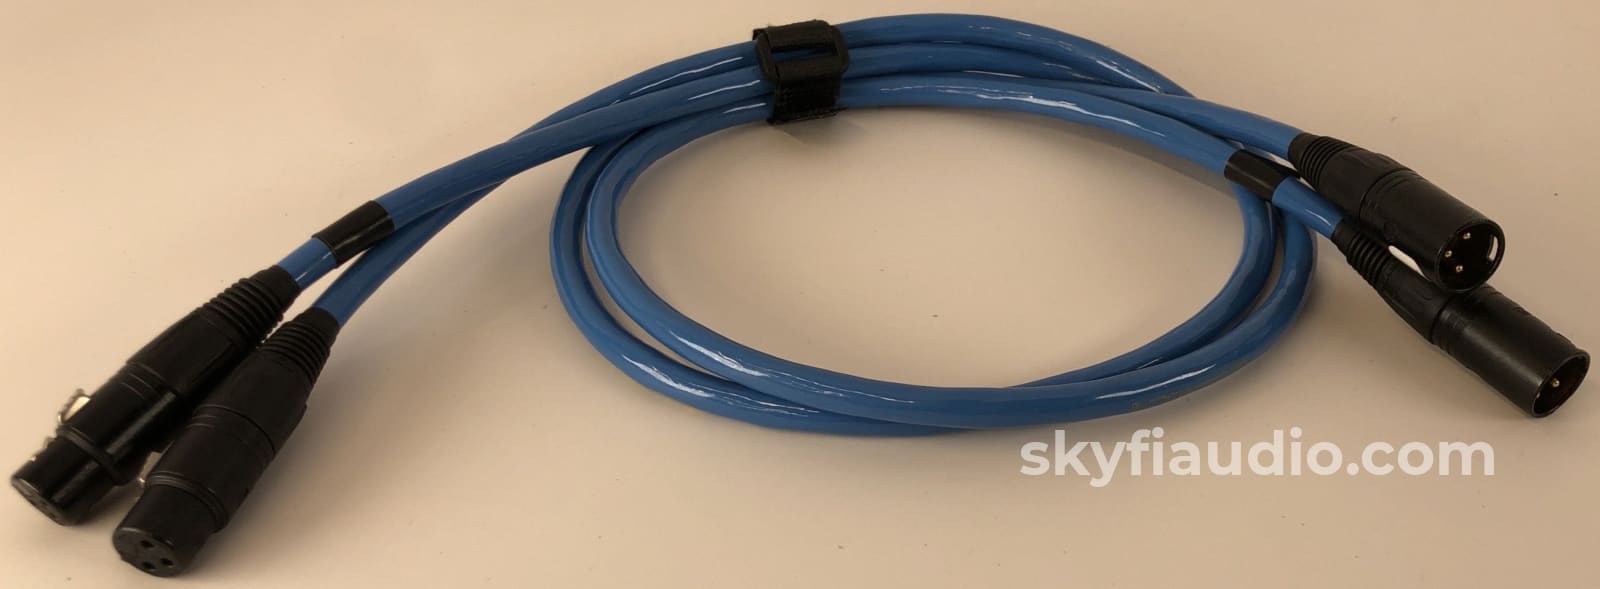 Siltech Cables Hf-9 G3 Series - Digital Audio Aes/Ebu (Xlr Connector) Cable 1M